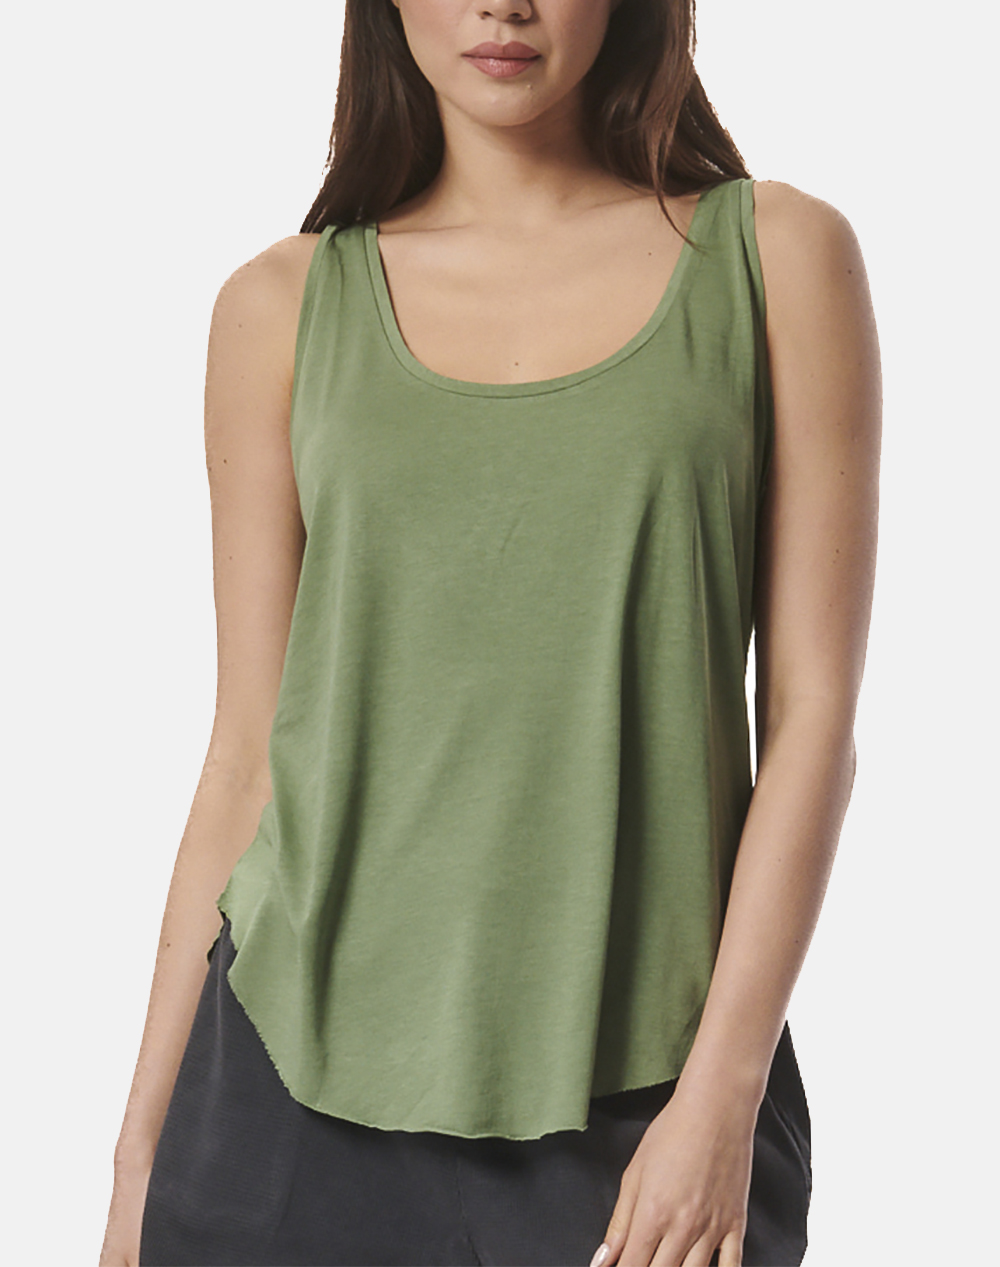 BODY ACTION WOMEN”S NATURAL DYE TANK TOP 041423-01-Hedge Green Olive